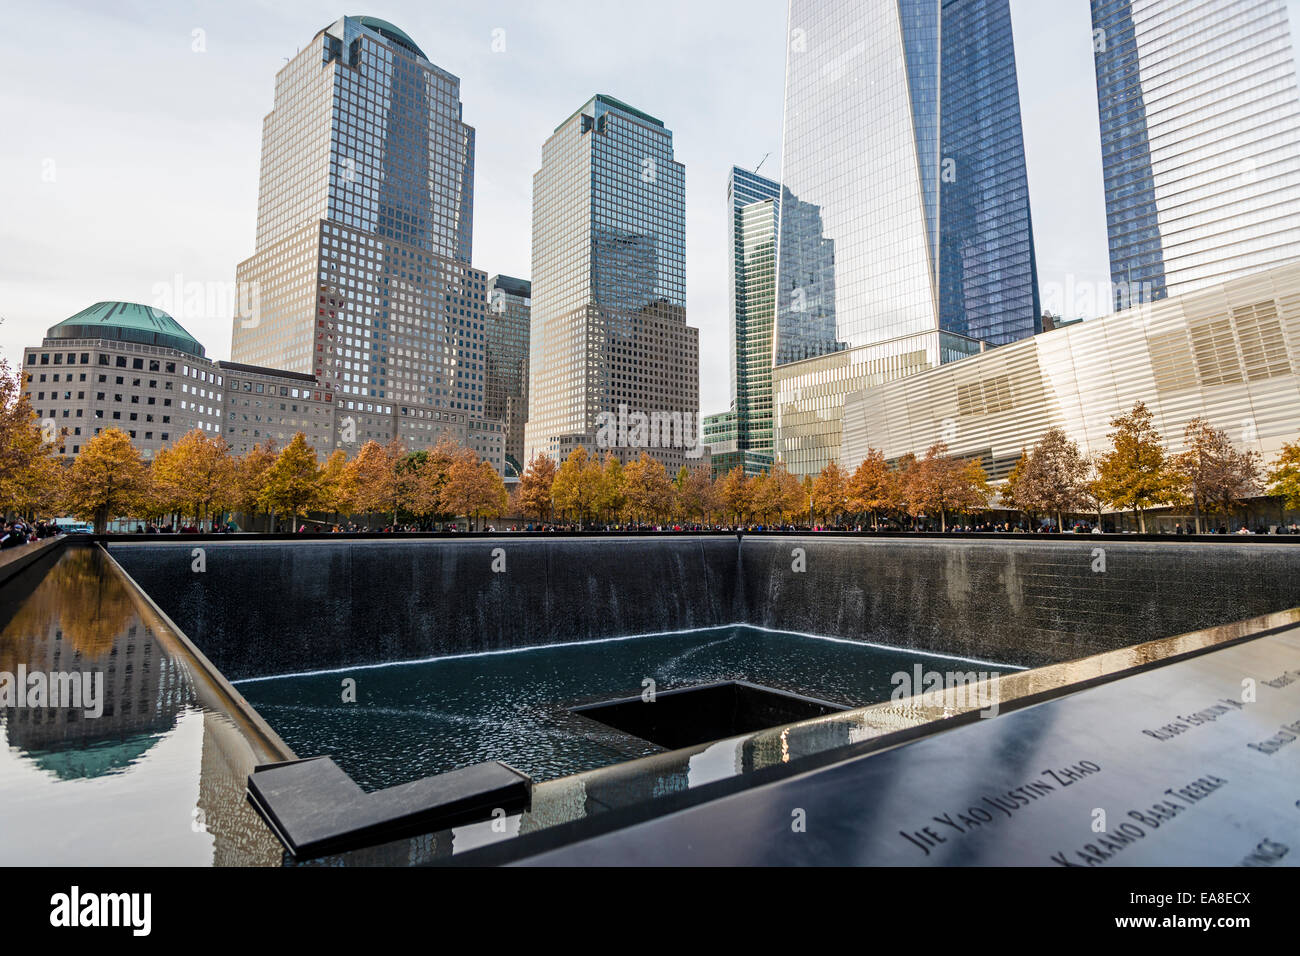 New York, NY 911 mémorial pour les victimes du World Trade Center ©Stacy Walsh Rosenstock/Alamy Banque D'Images